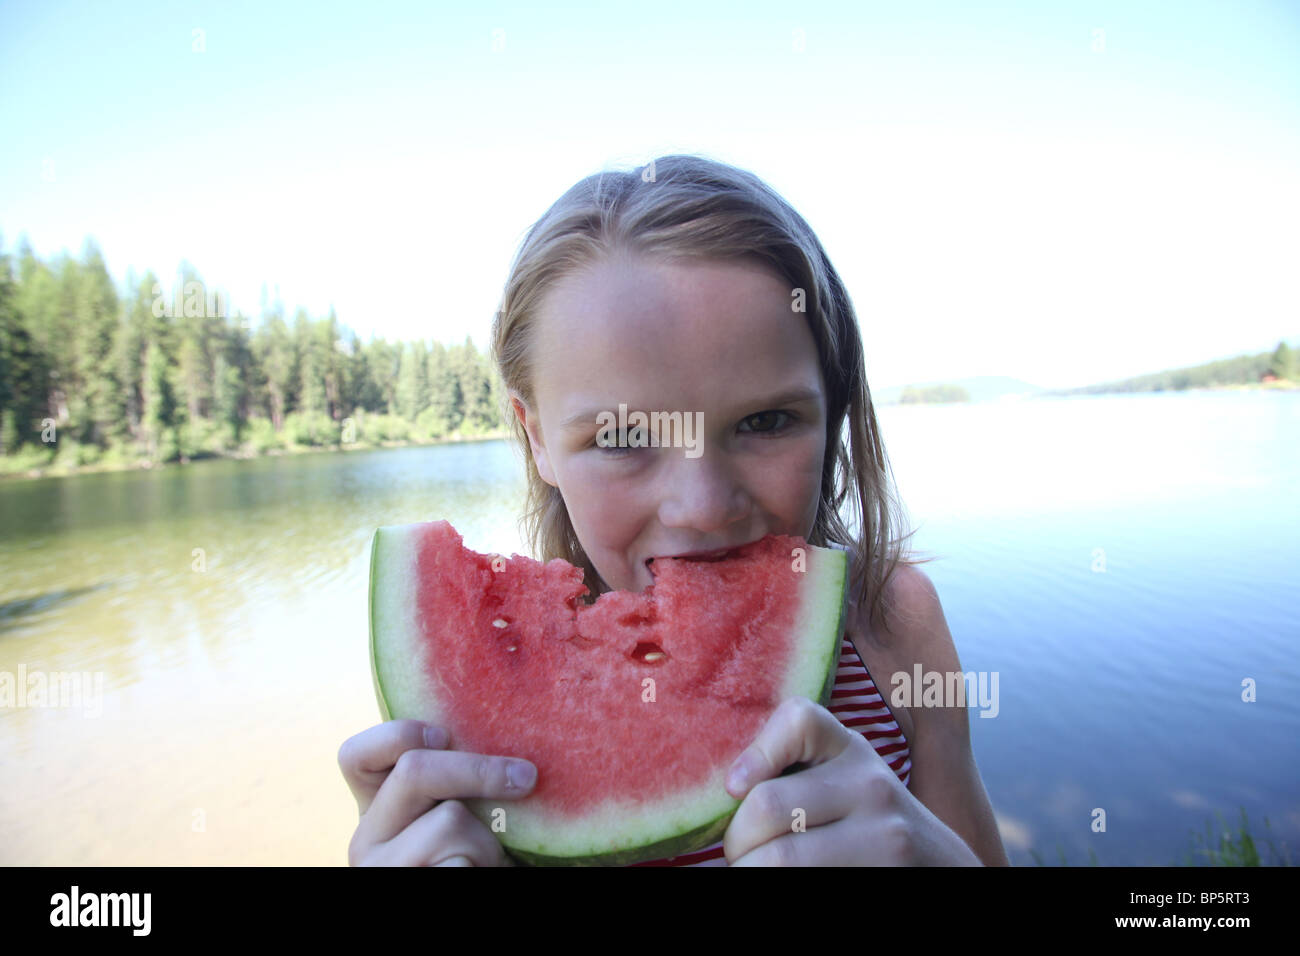 girl eating a slice of watermelon on summer day Stock Photo